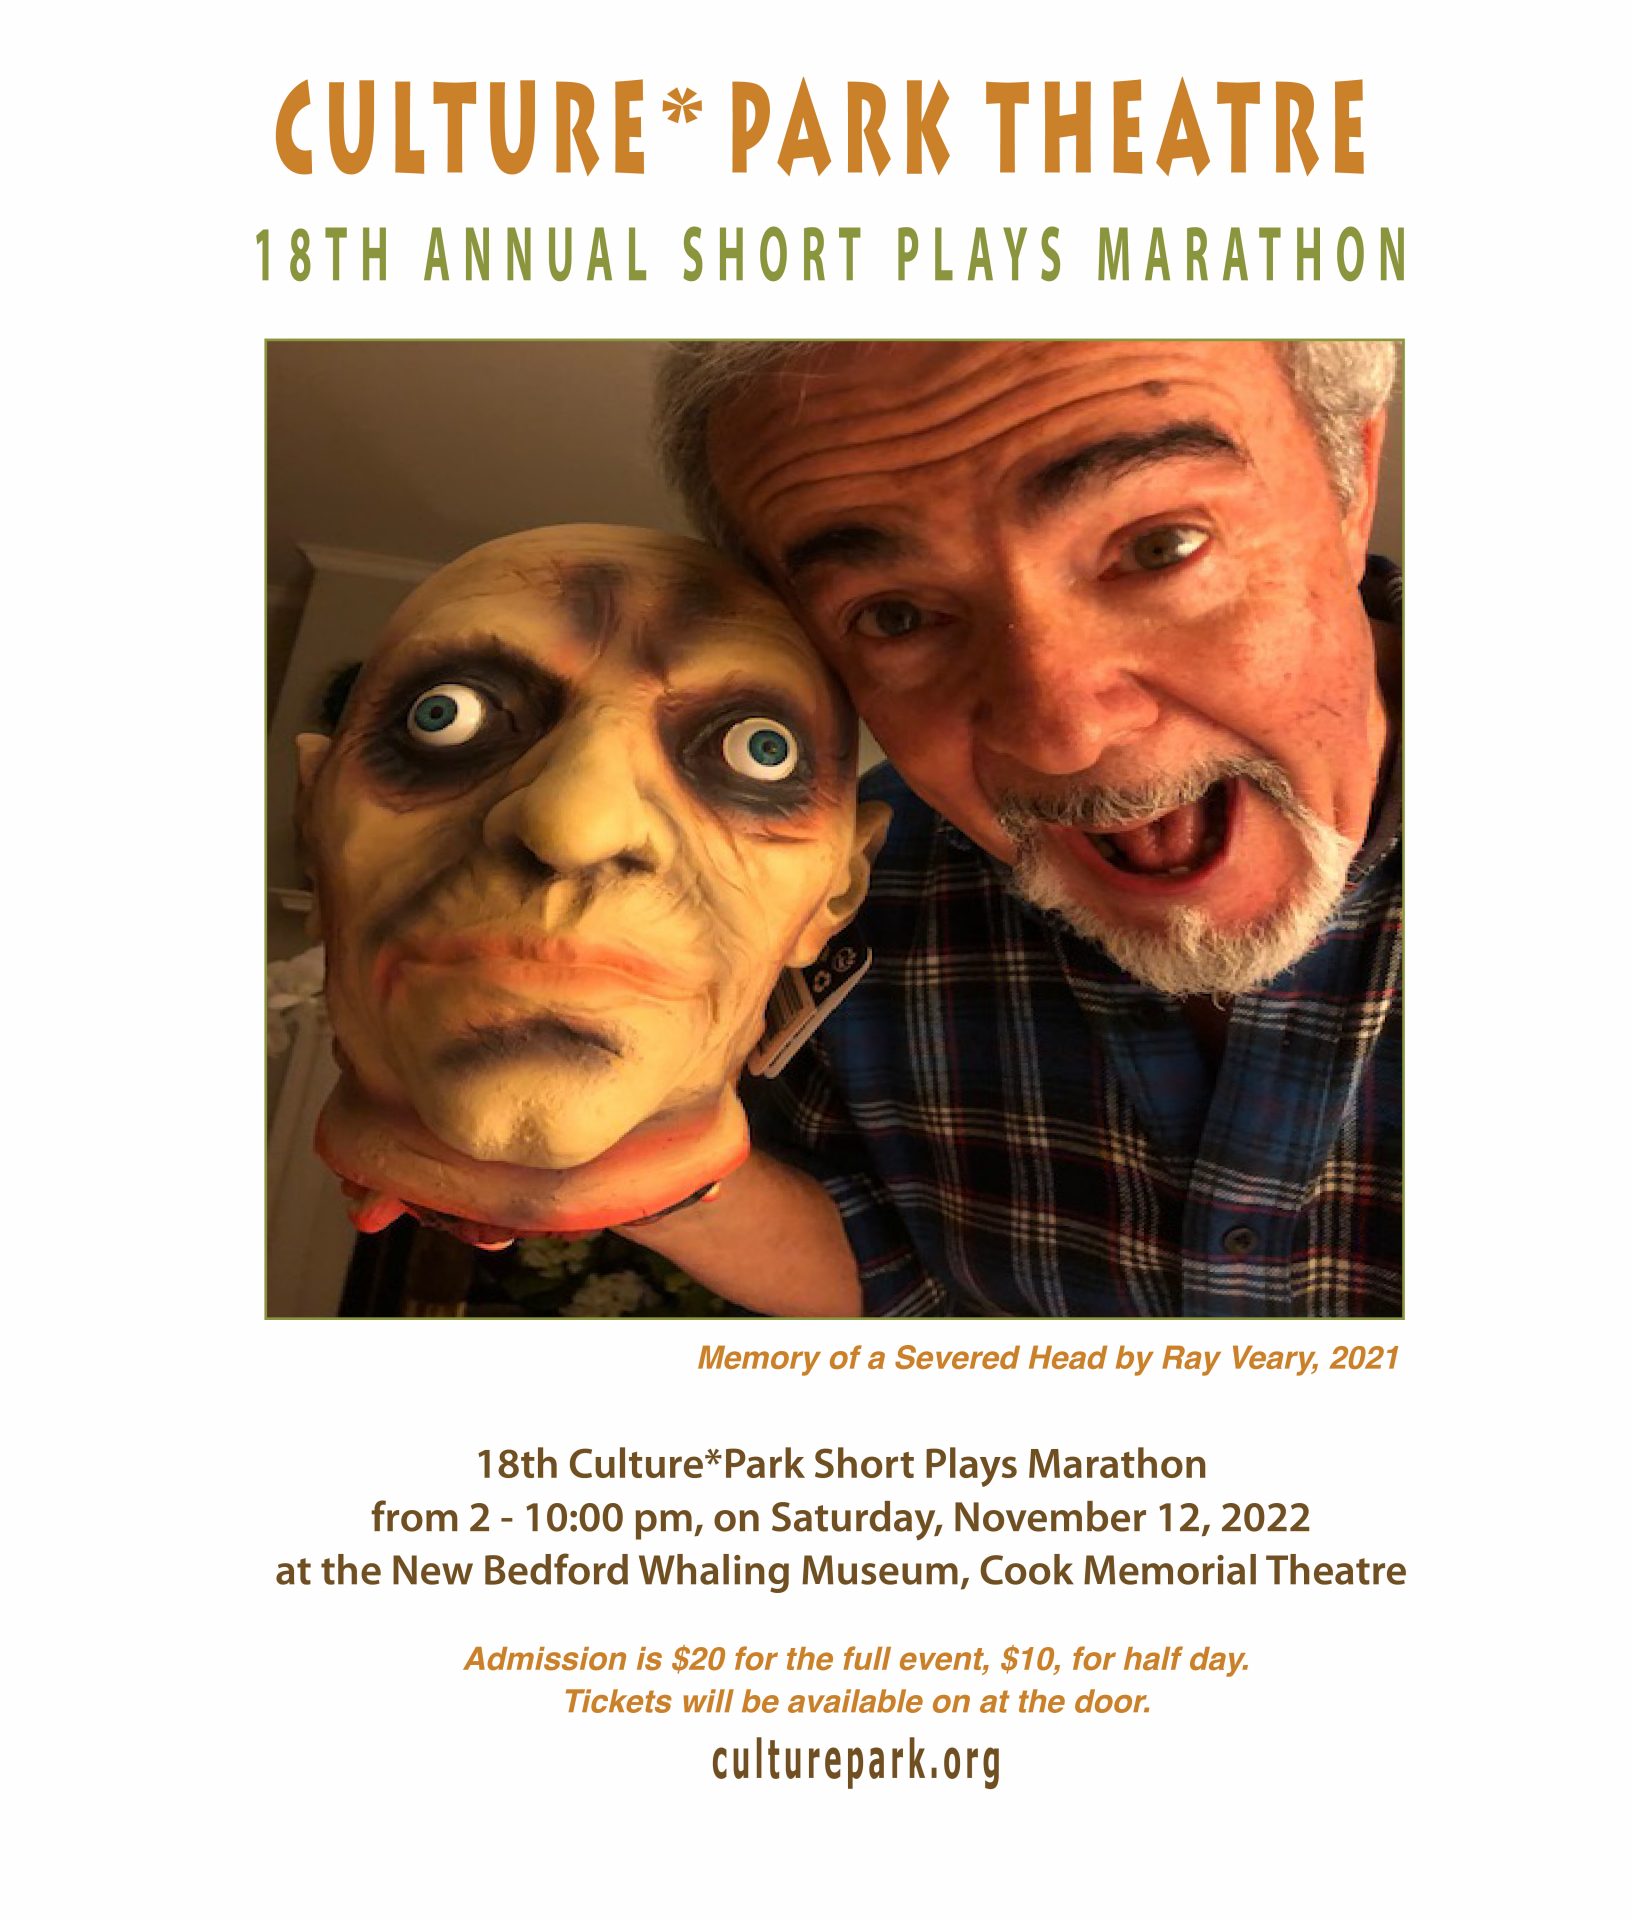 A photograph of a man posing with a dummy severed head with a title above that reads "Culture Park Theatre, 18th Annual Short Plays Marathon"